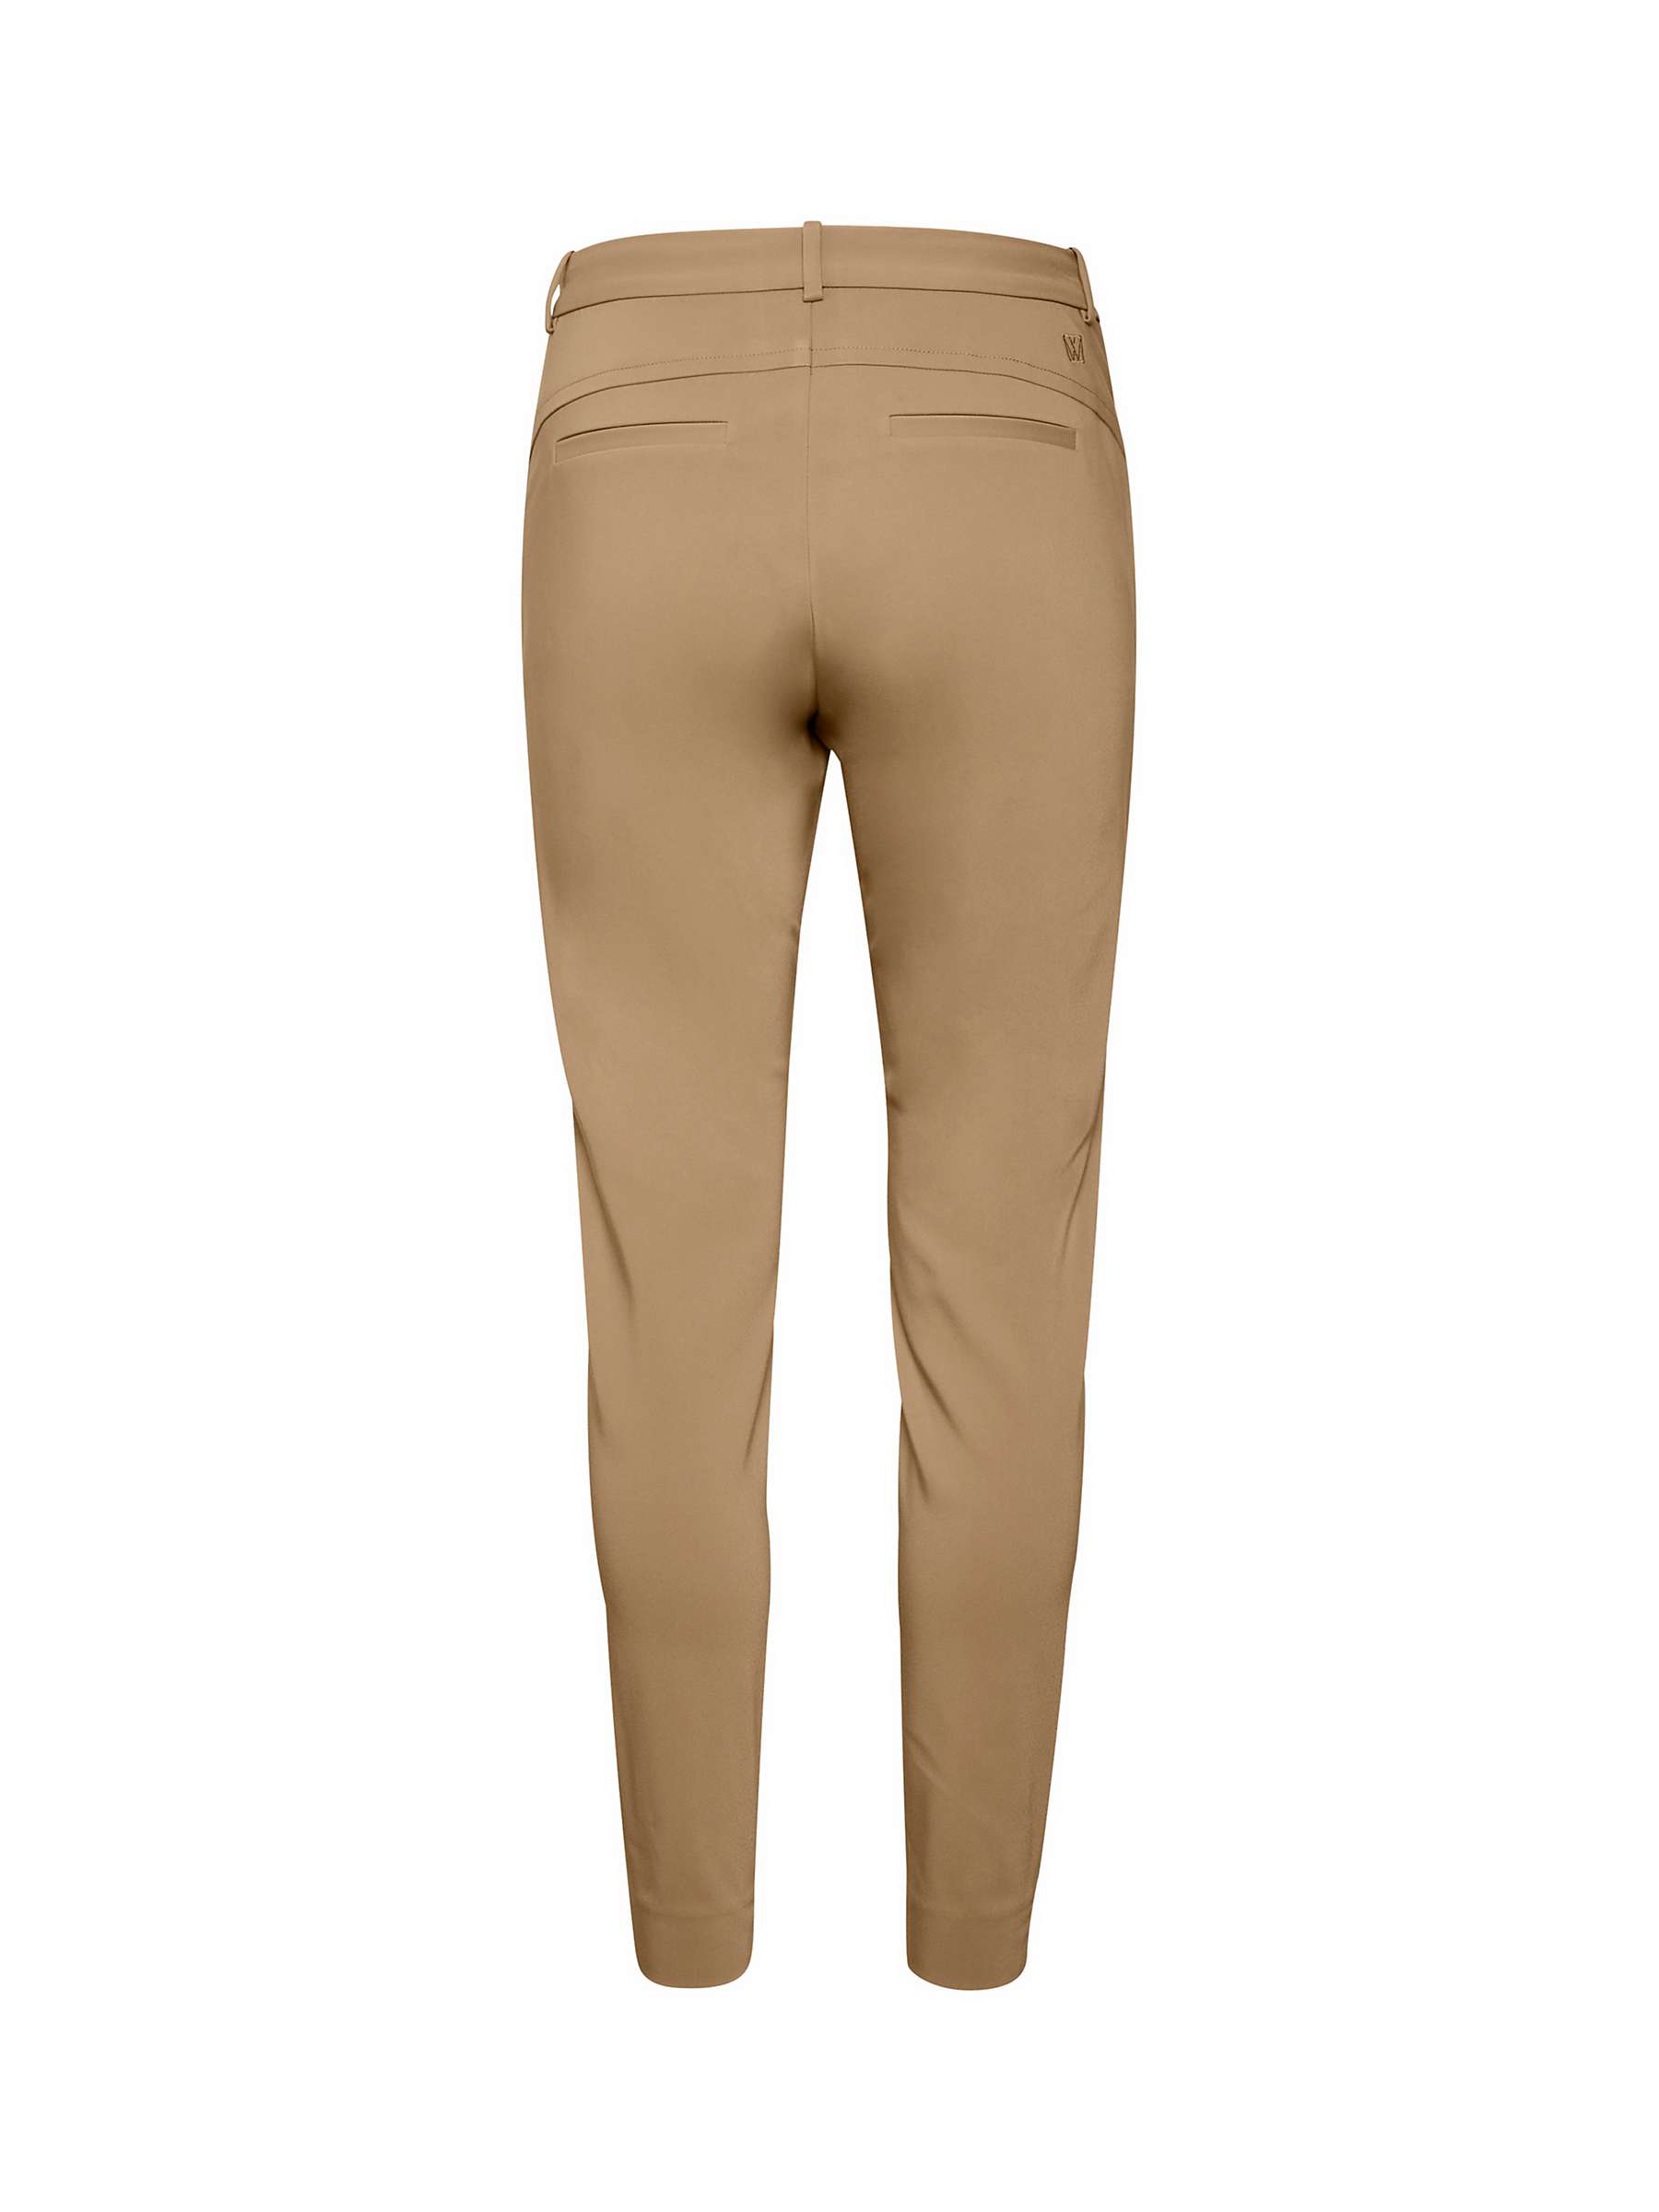 InWear Vanessa Ankle Trousers, Amphora at John Lewis & Partners